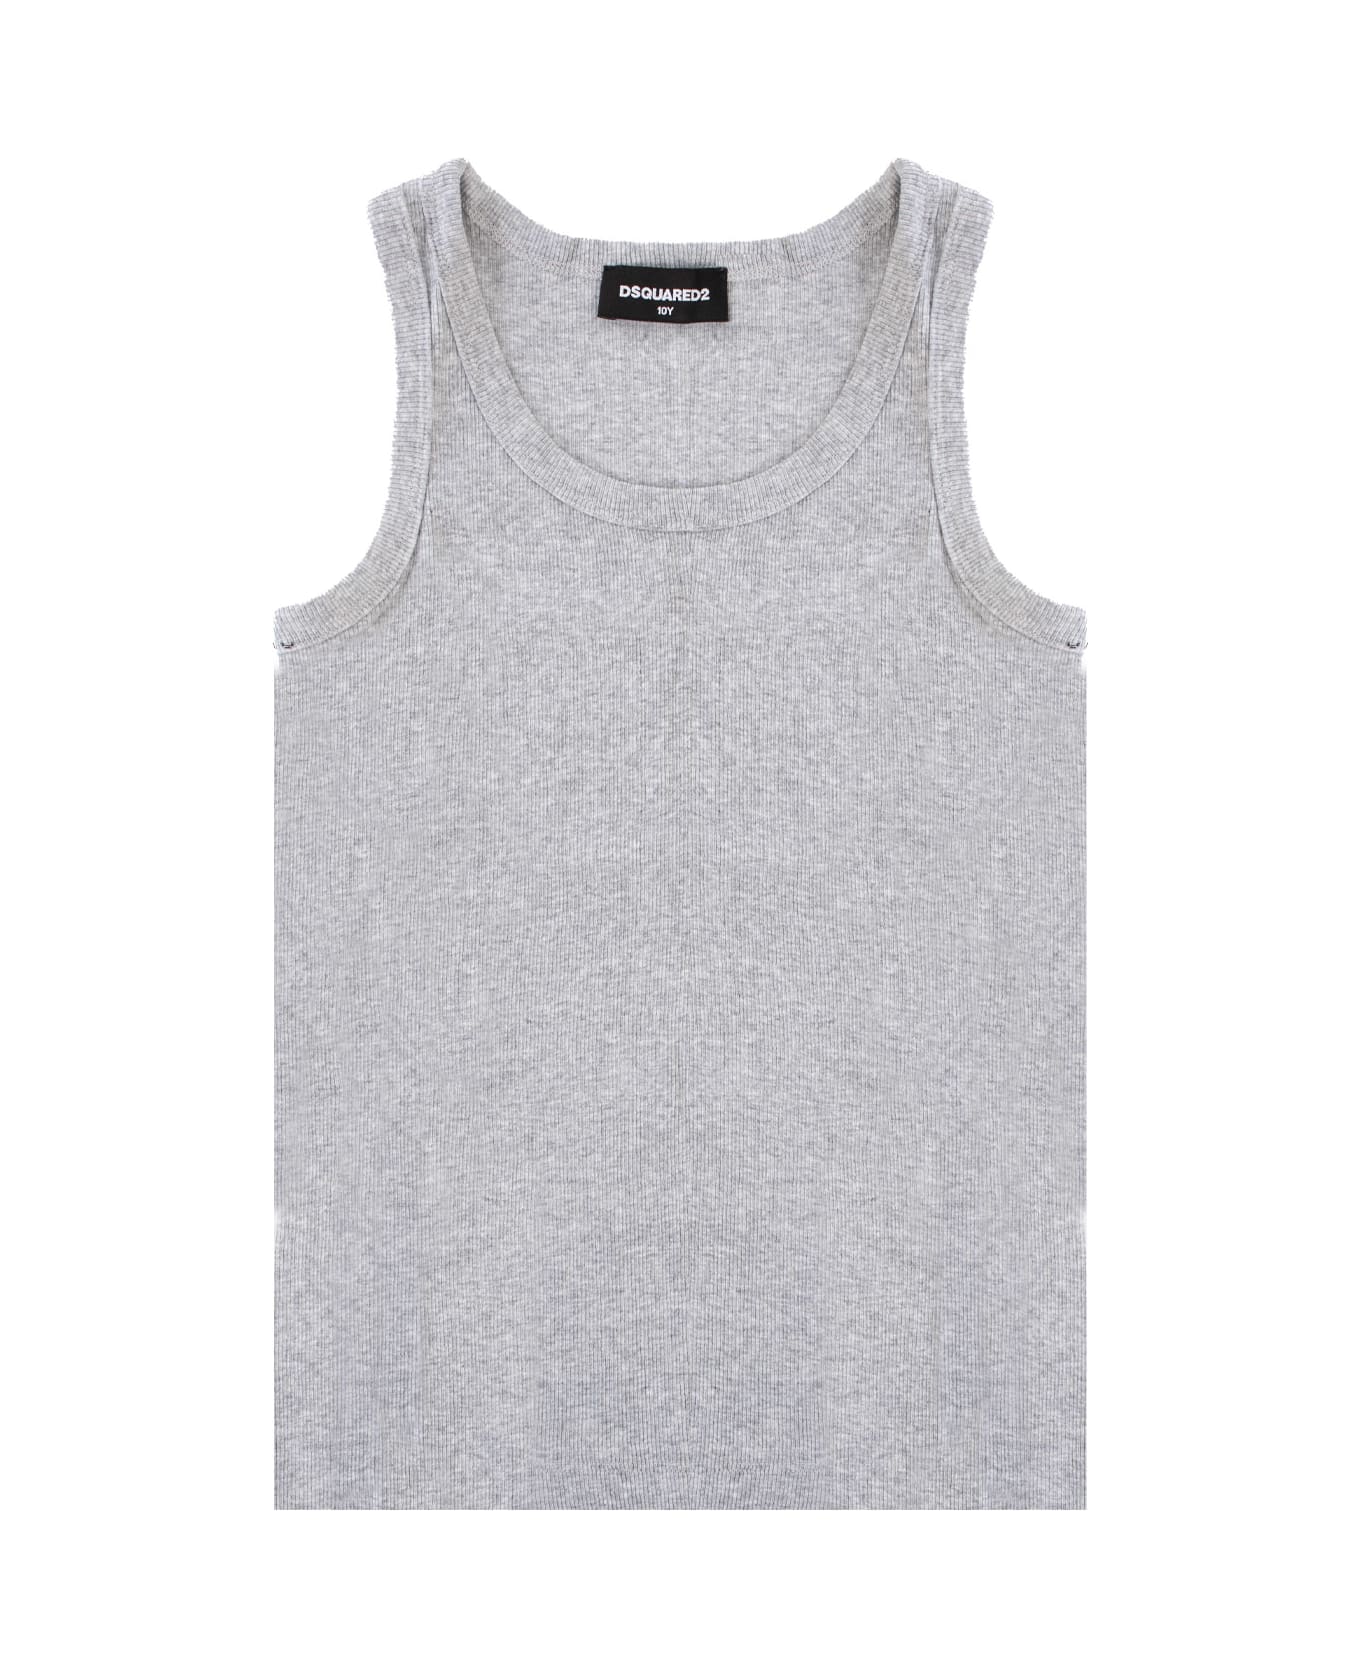 Dsquared2 Cotton Tank Top - Grey